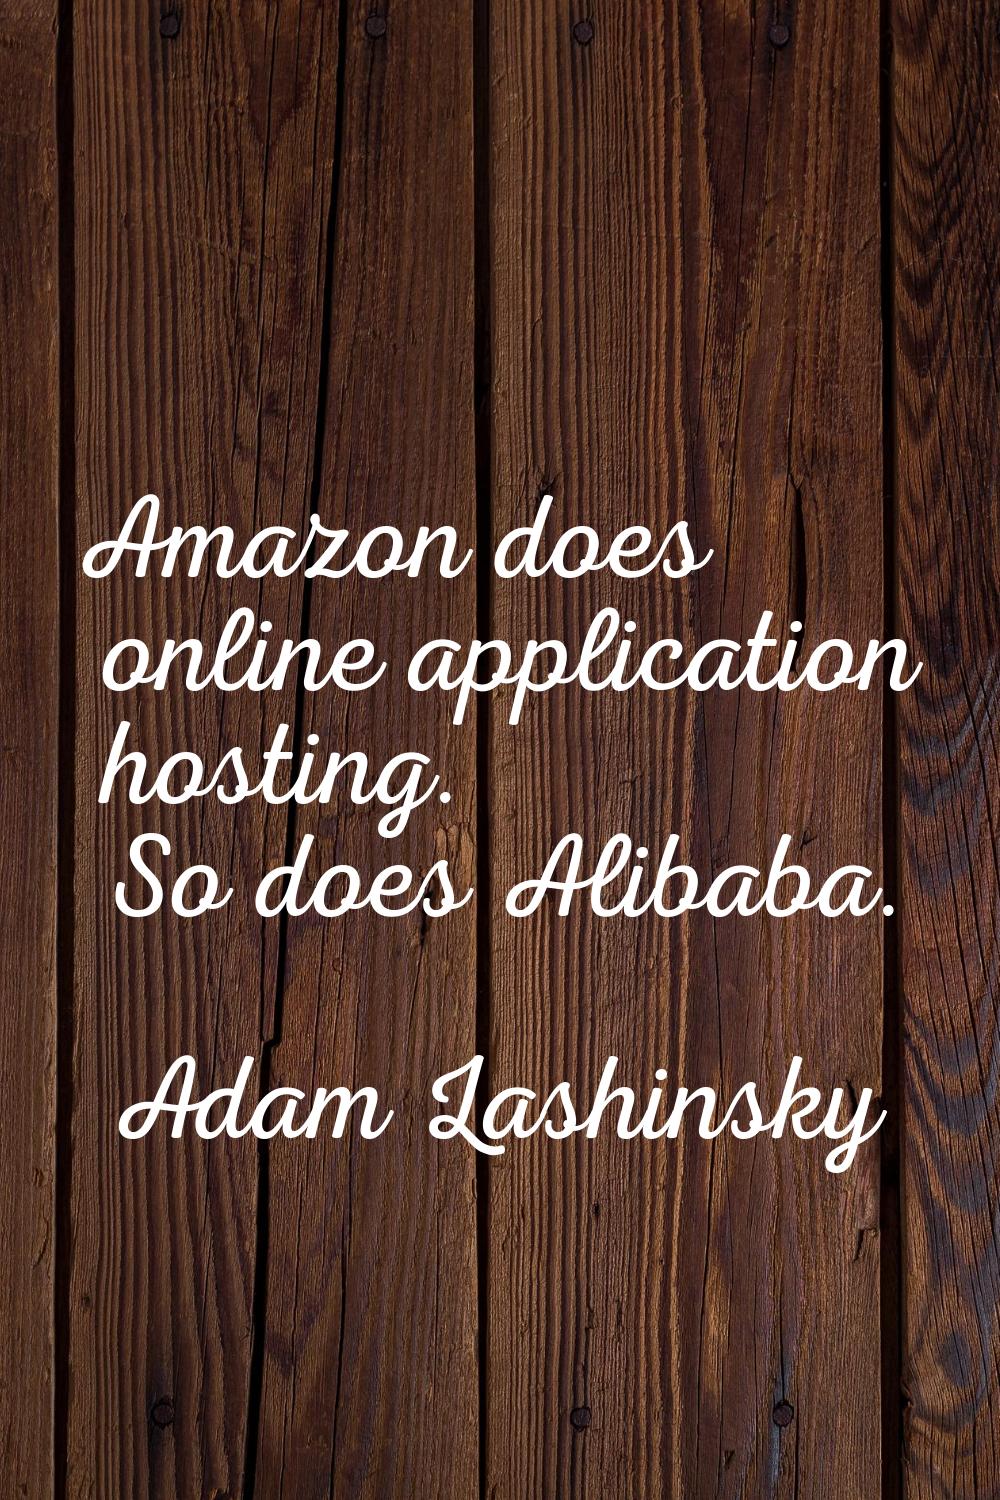 Amazon does online application hosting. So does Alibaba.